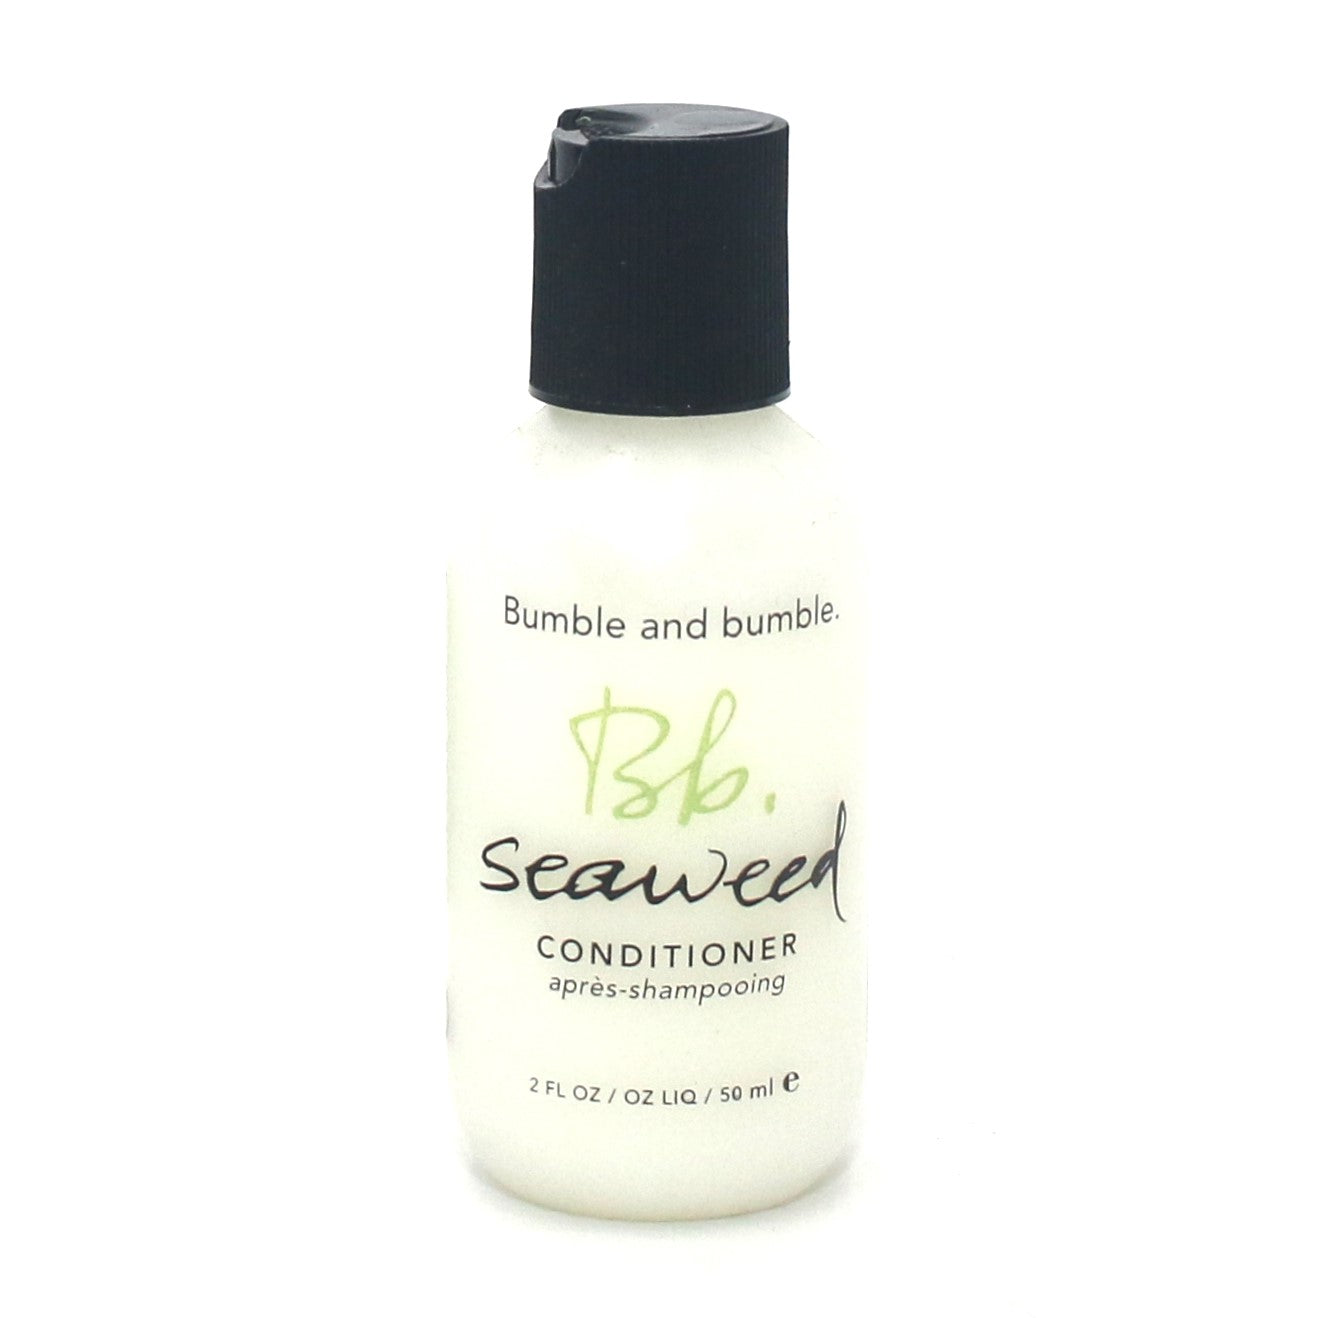 Bumble and bumble Bb Seaweed Conditioner 2 oz